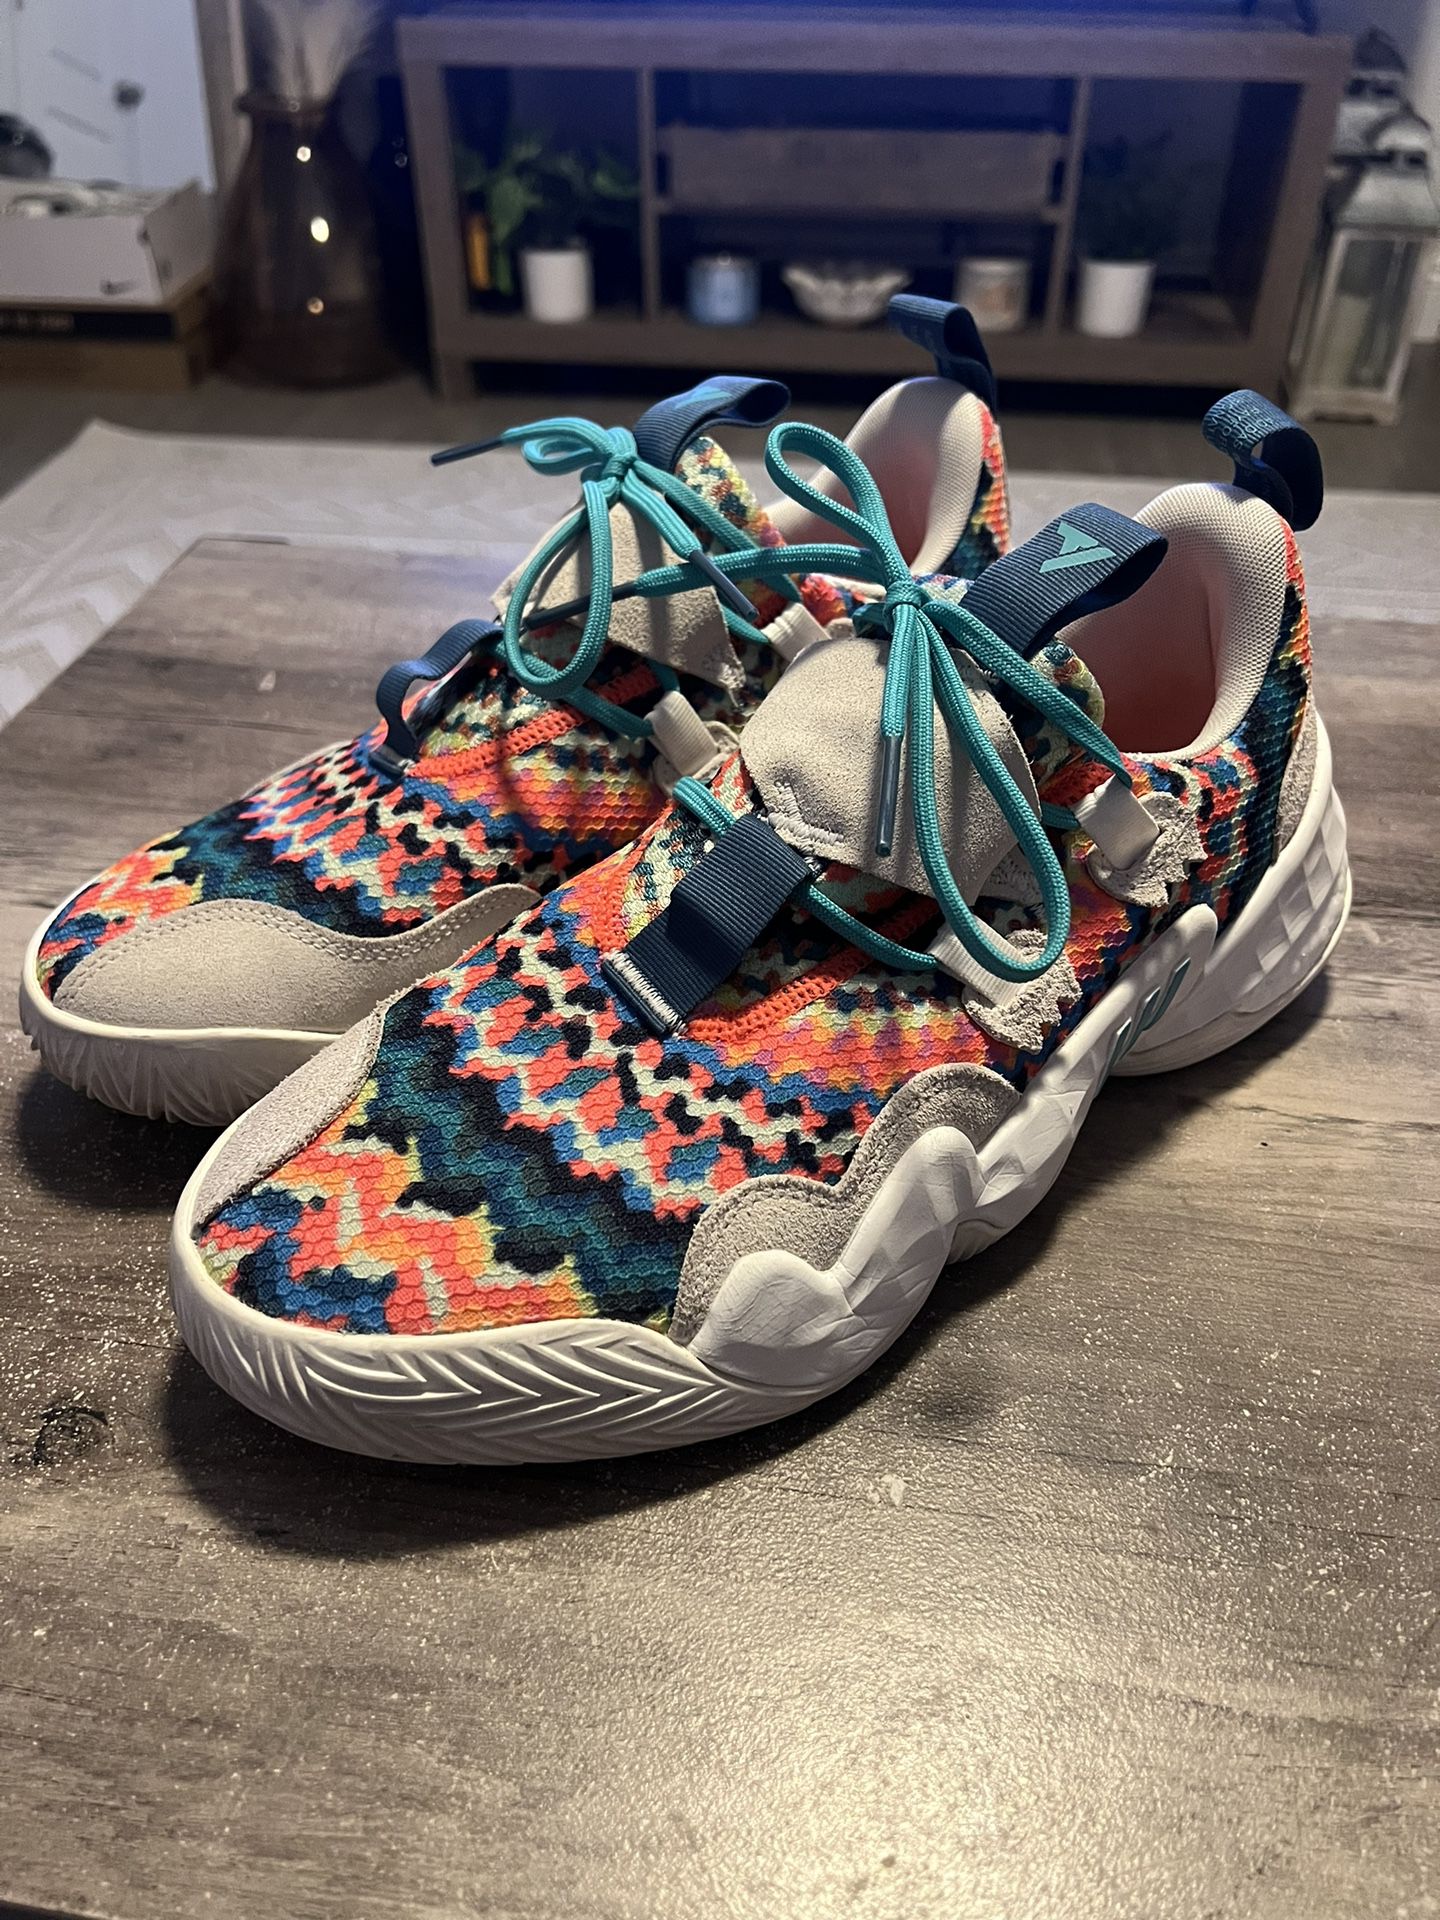 Adidas Trae Young 1 “Tie-Dye” (size 10)